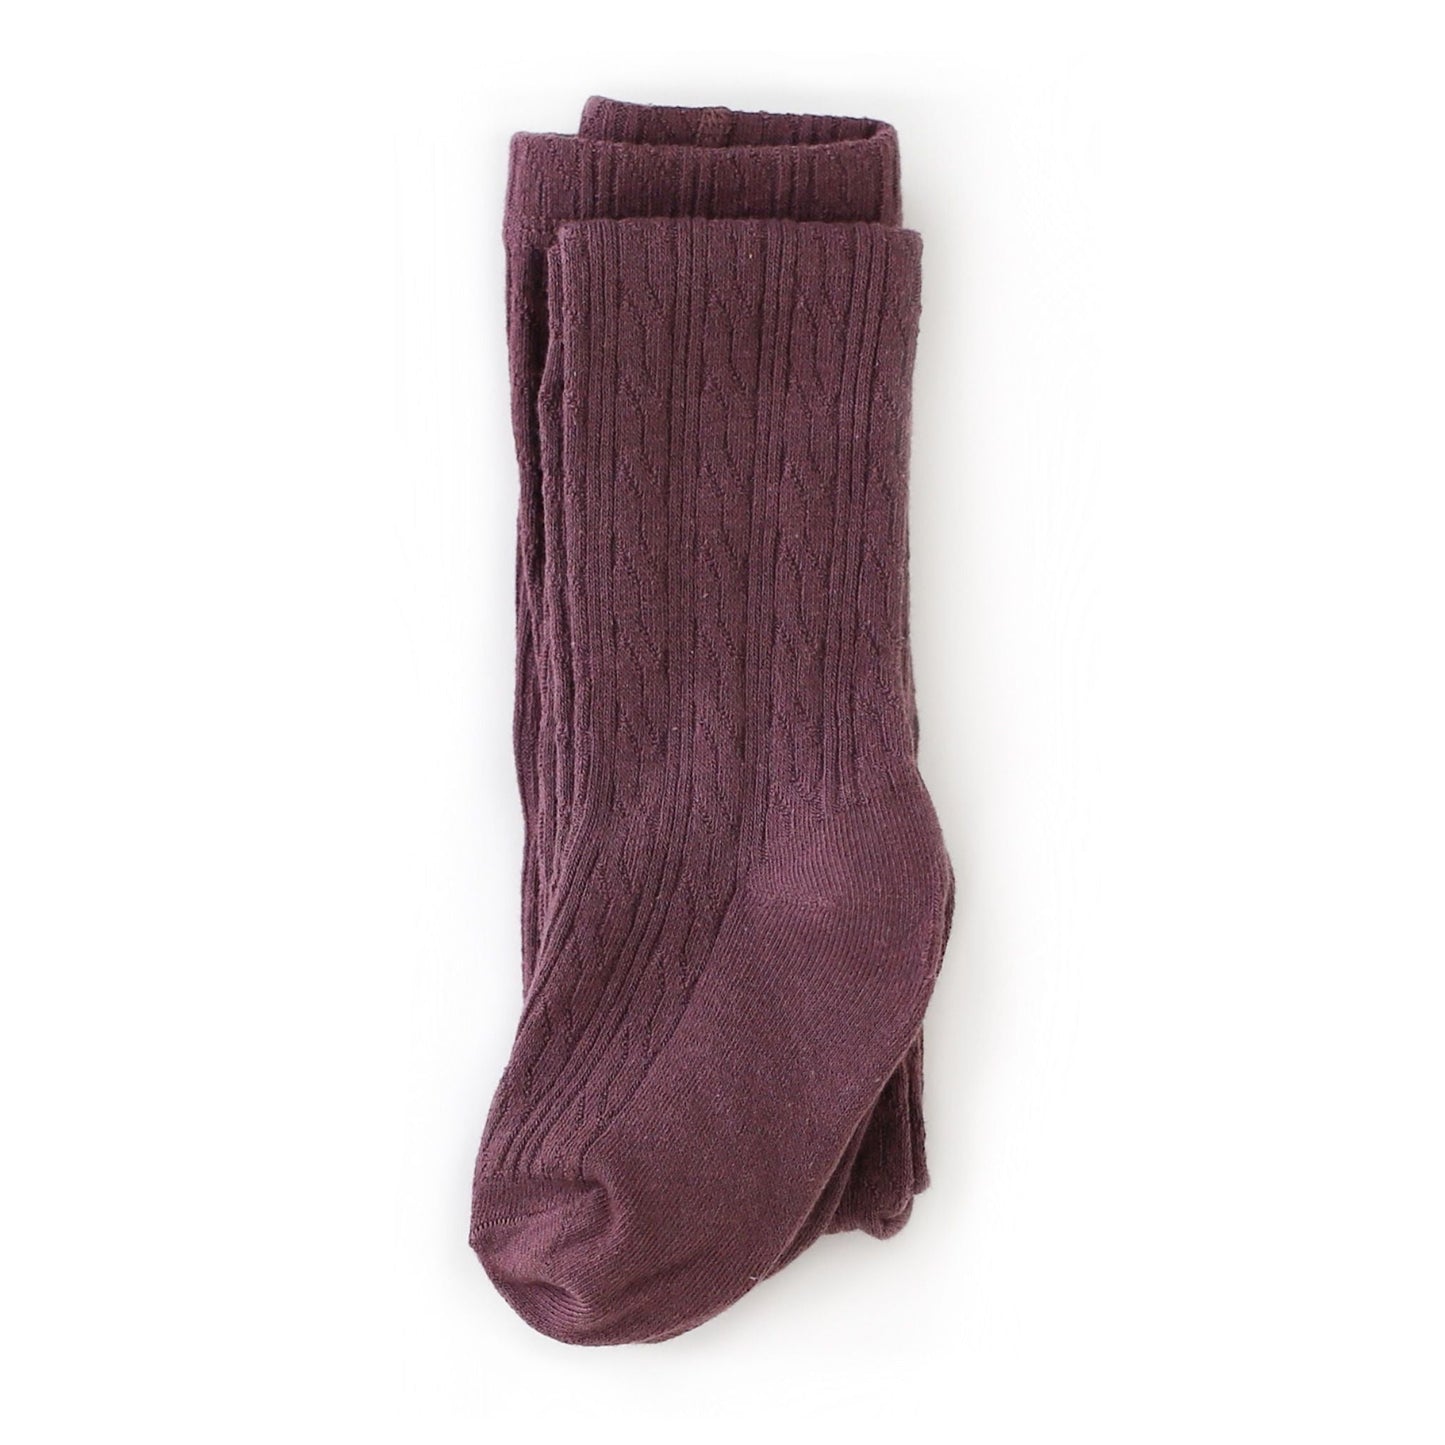 Dusty plum cable knit tights by little stocking co.